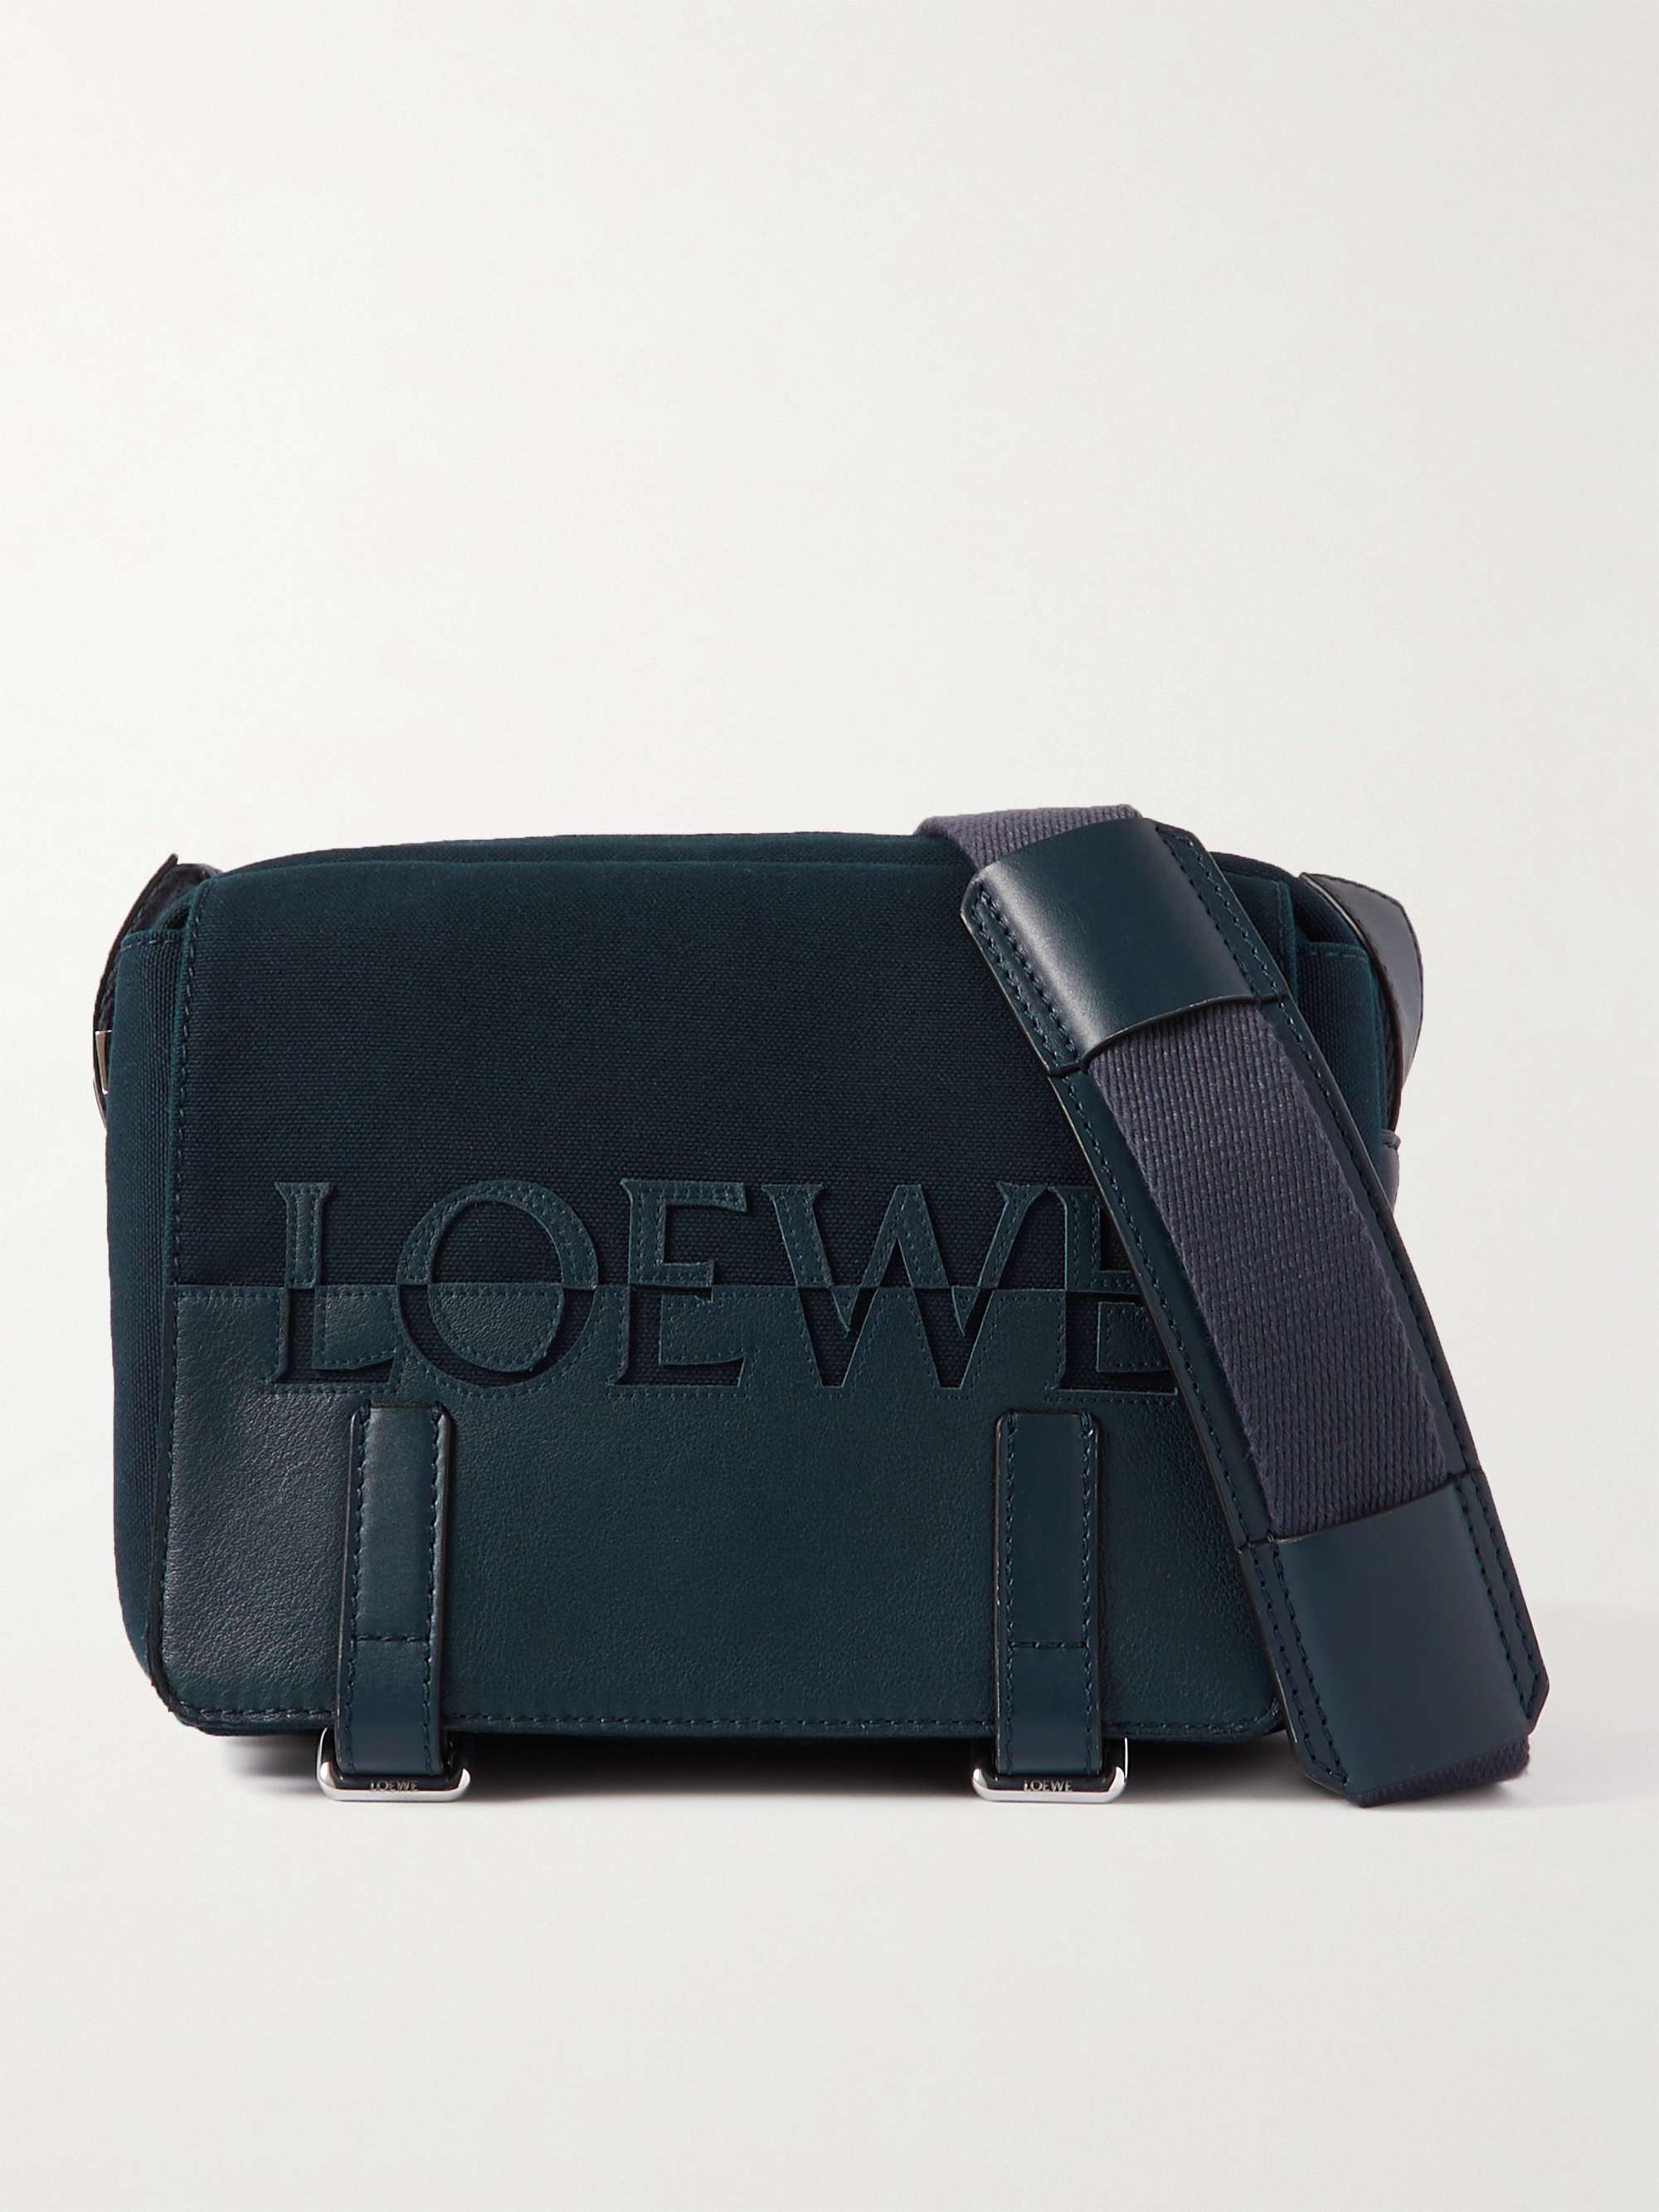 LOEWE Military XS Leather-Trimmed Canvas Messenger Bag